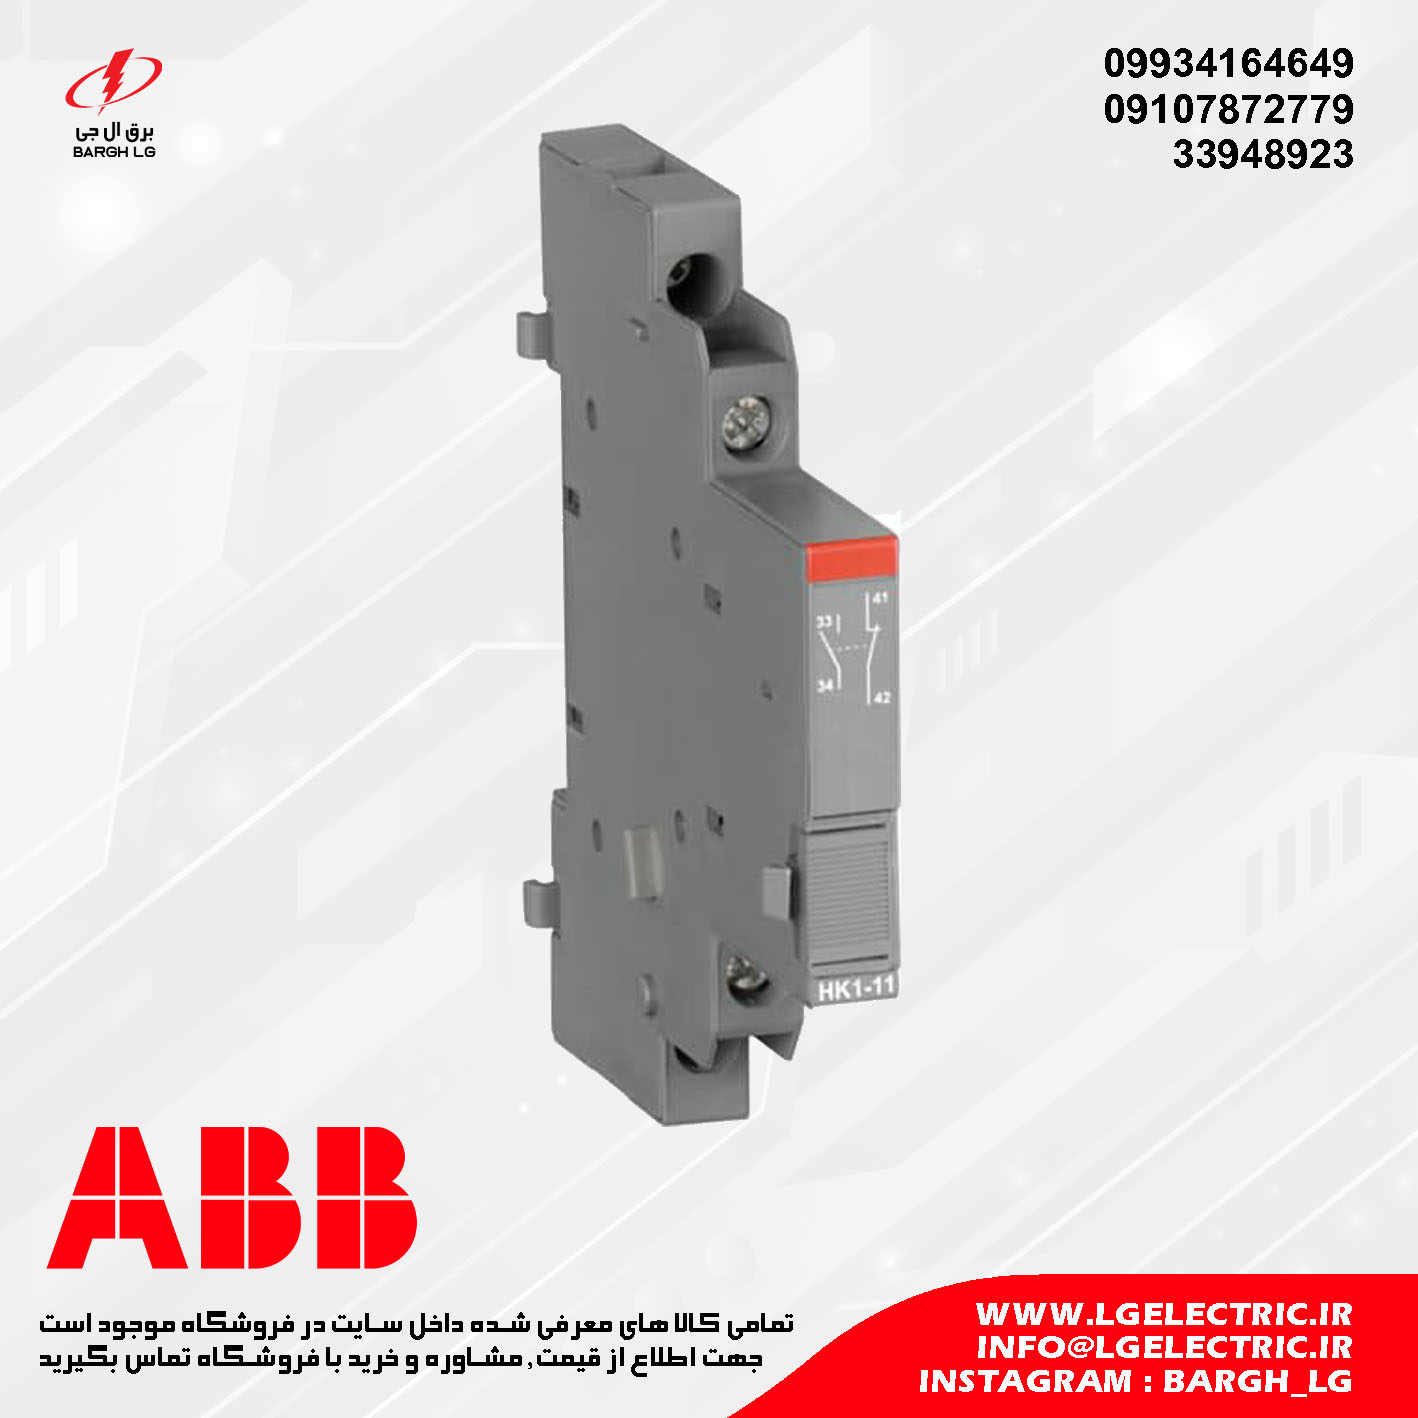 ABB HK1 Auxiliary Contact